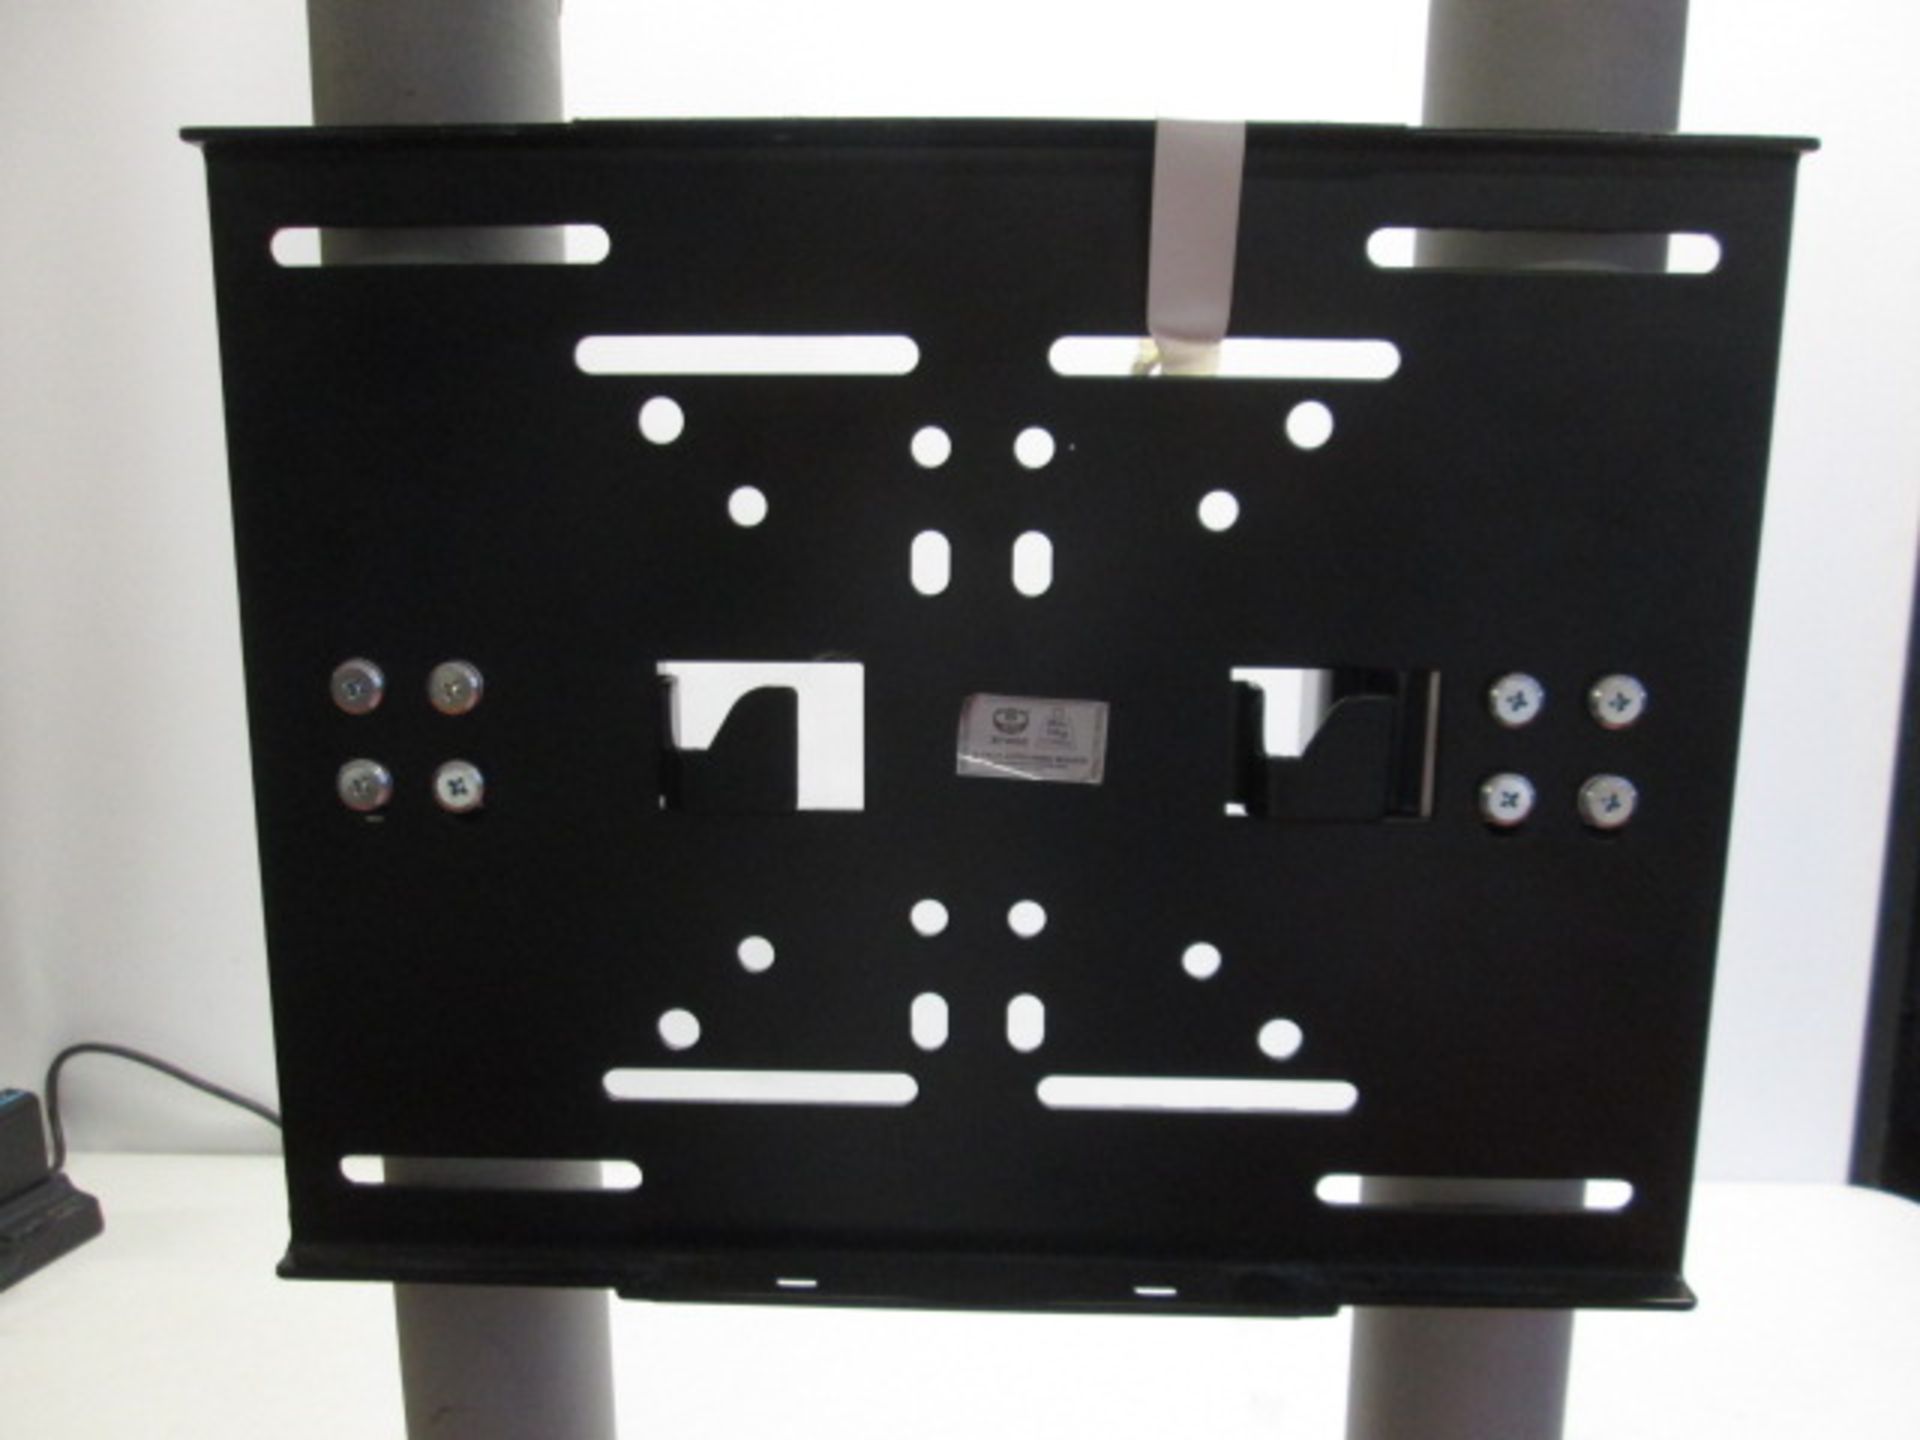 B-Tech Audio, Video Mount, 5ft Adjustable Height with TV Bracket Fixed. Max Cap 70kg/154lbs. Comes - Image 2 of 3